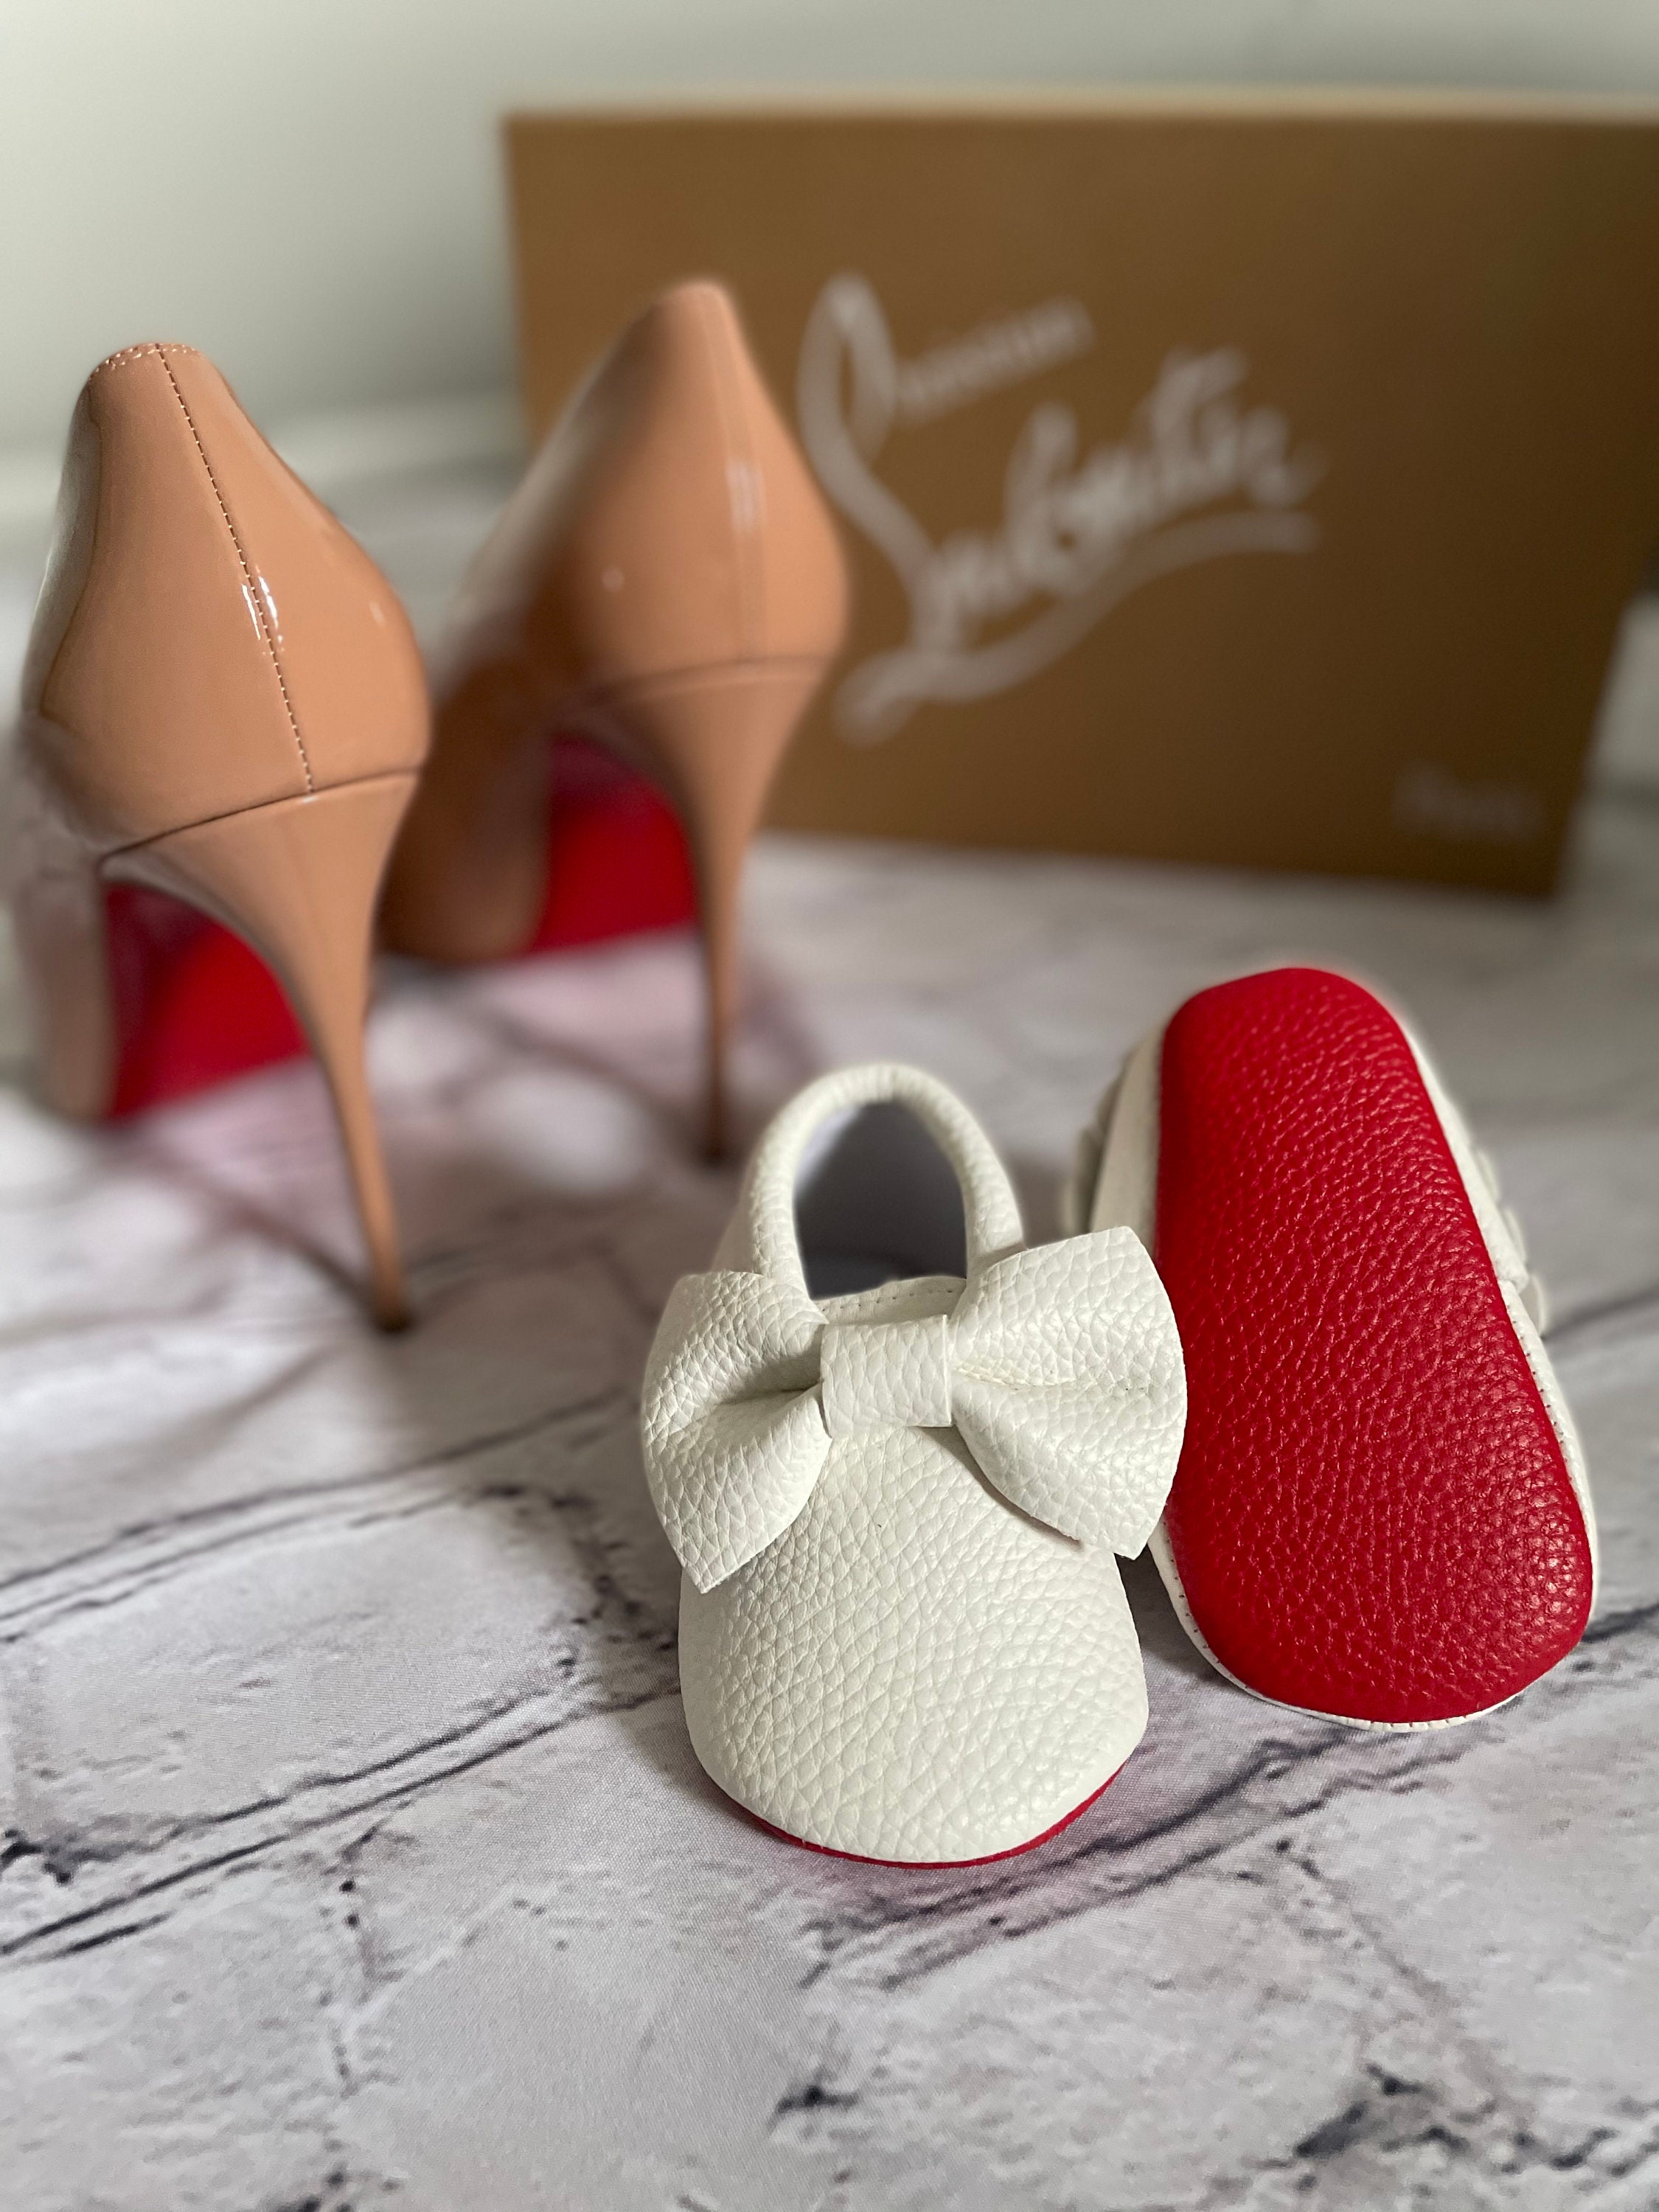 Buy Louis Vuitton Baby Shoes Online In India -  India